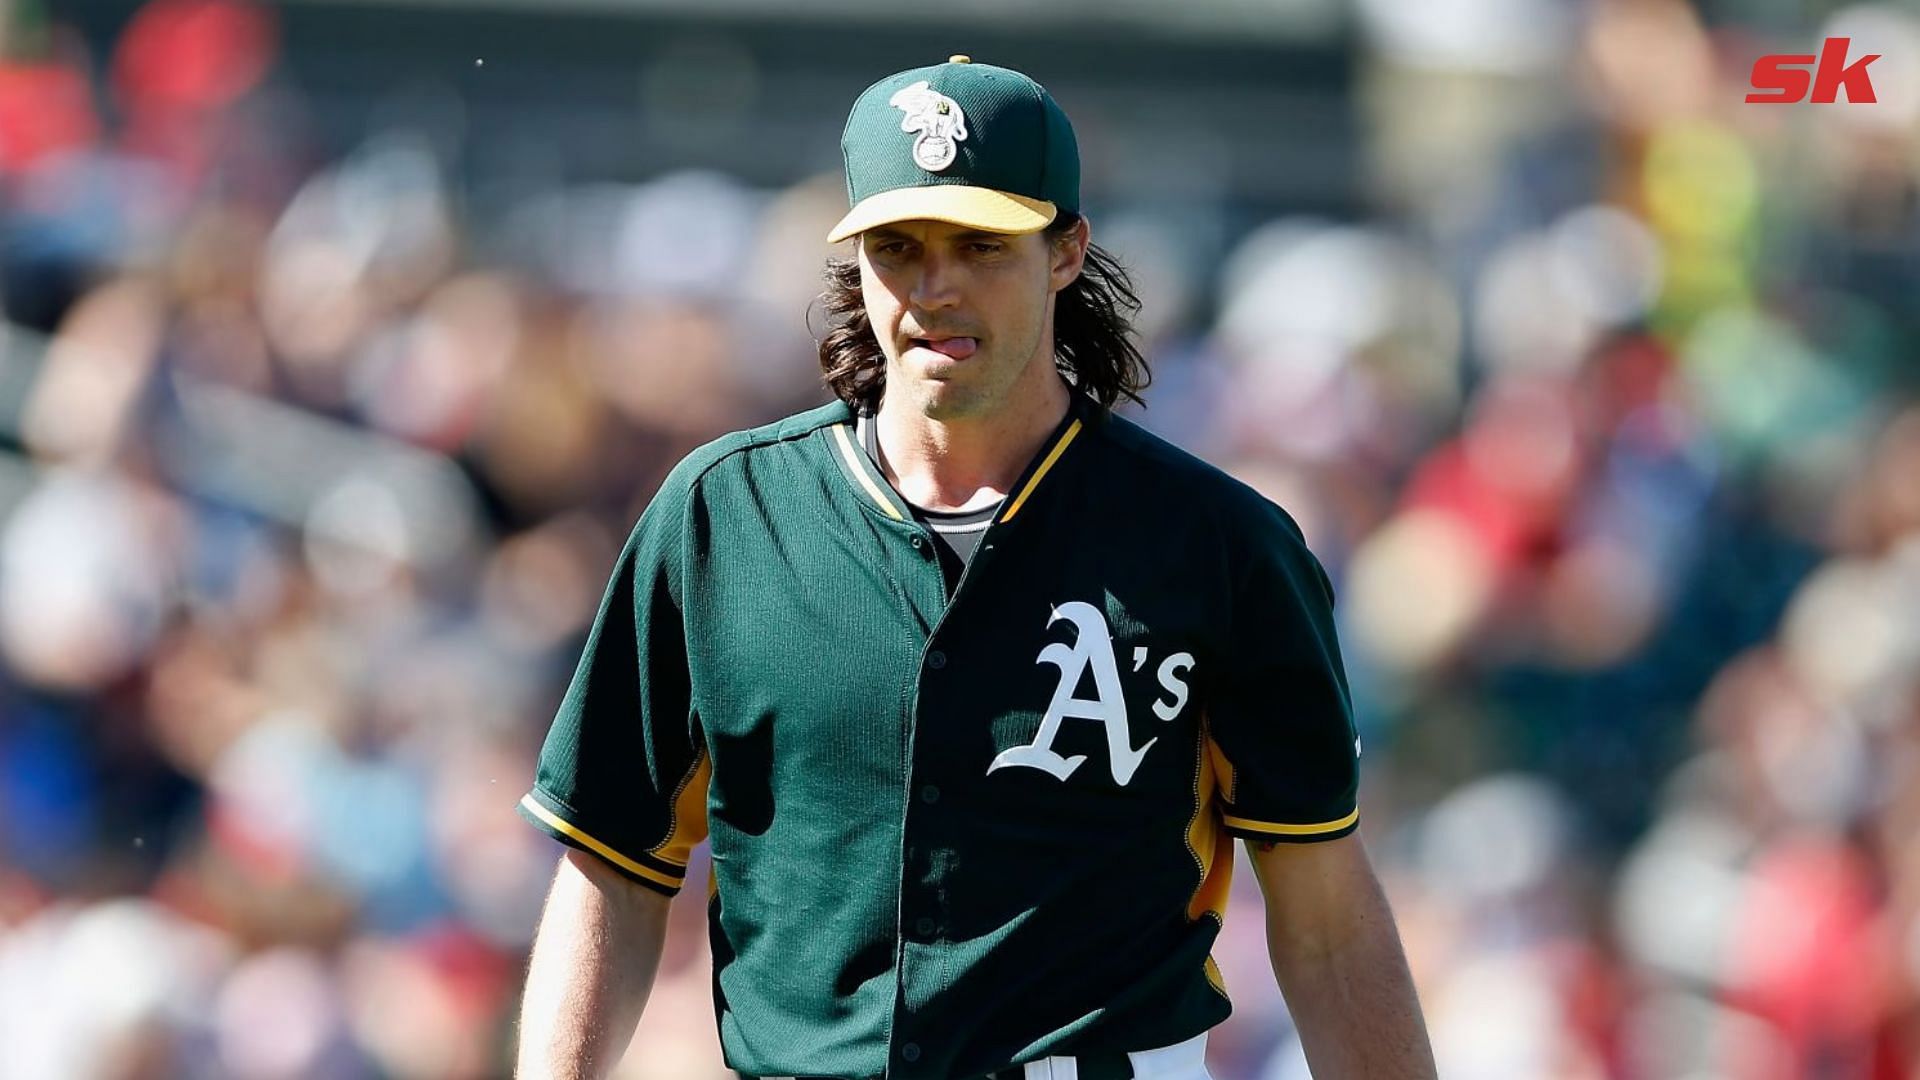 Barry Zito talks about life after baseball, saving energy